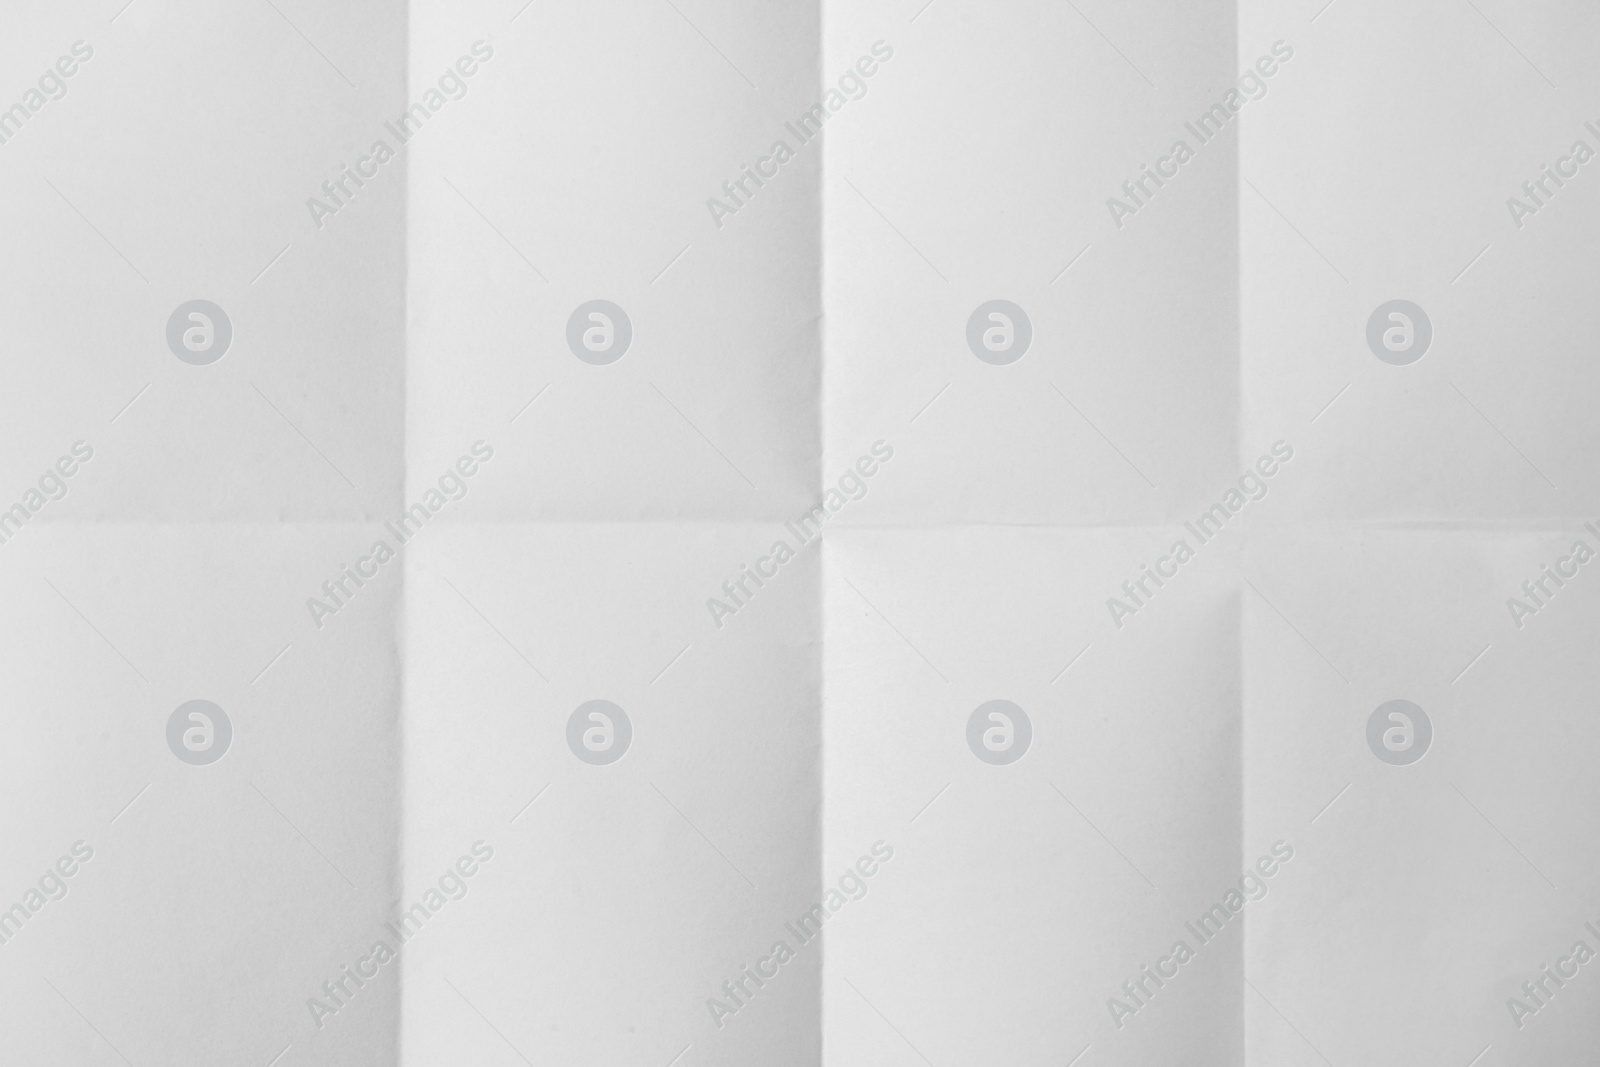 Photo of Sheet of folded white paper as background, top view